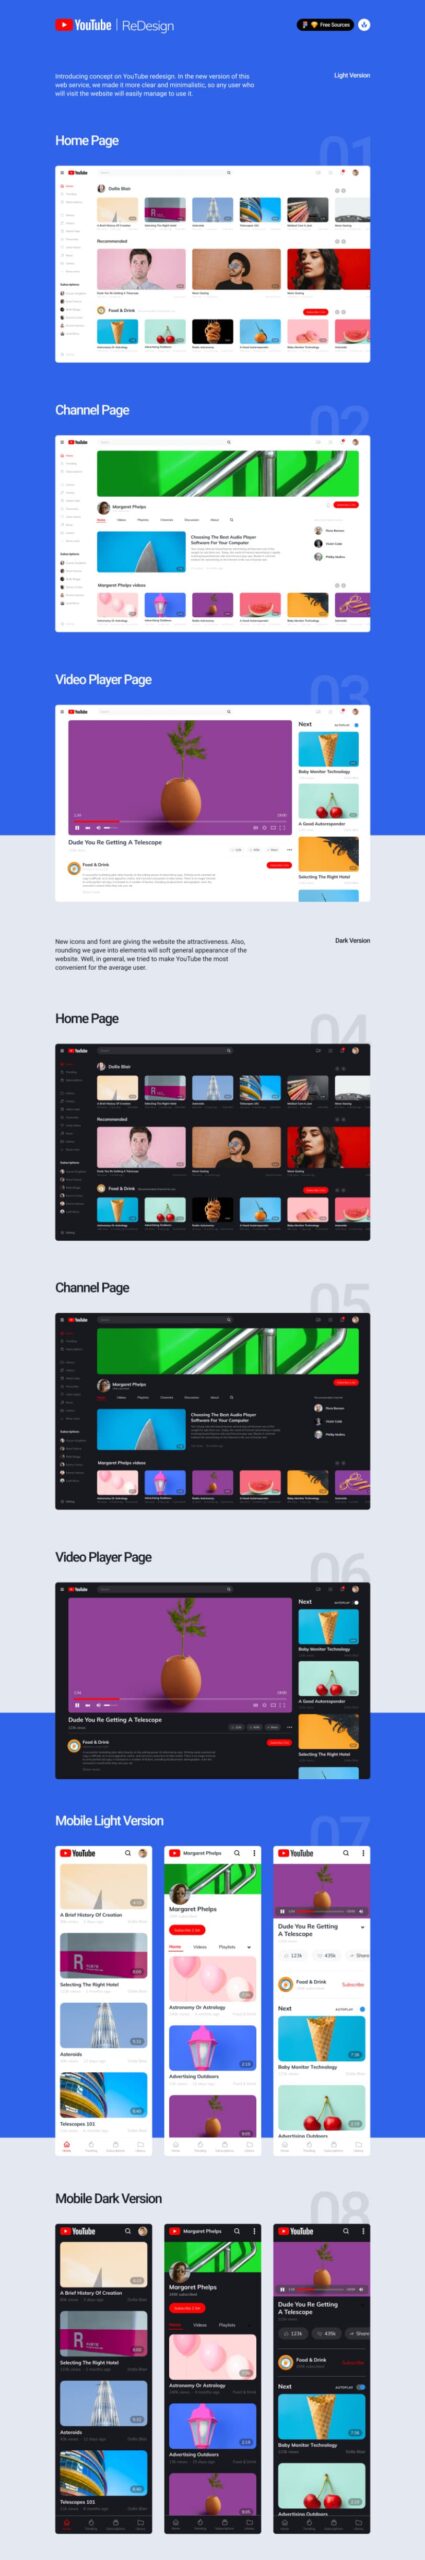 Free Youtube Redesign Concept